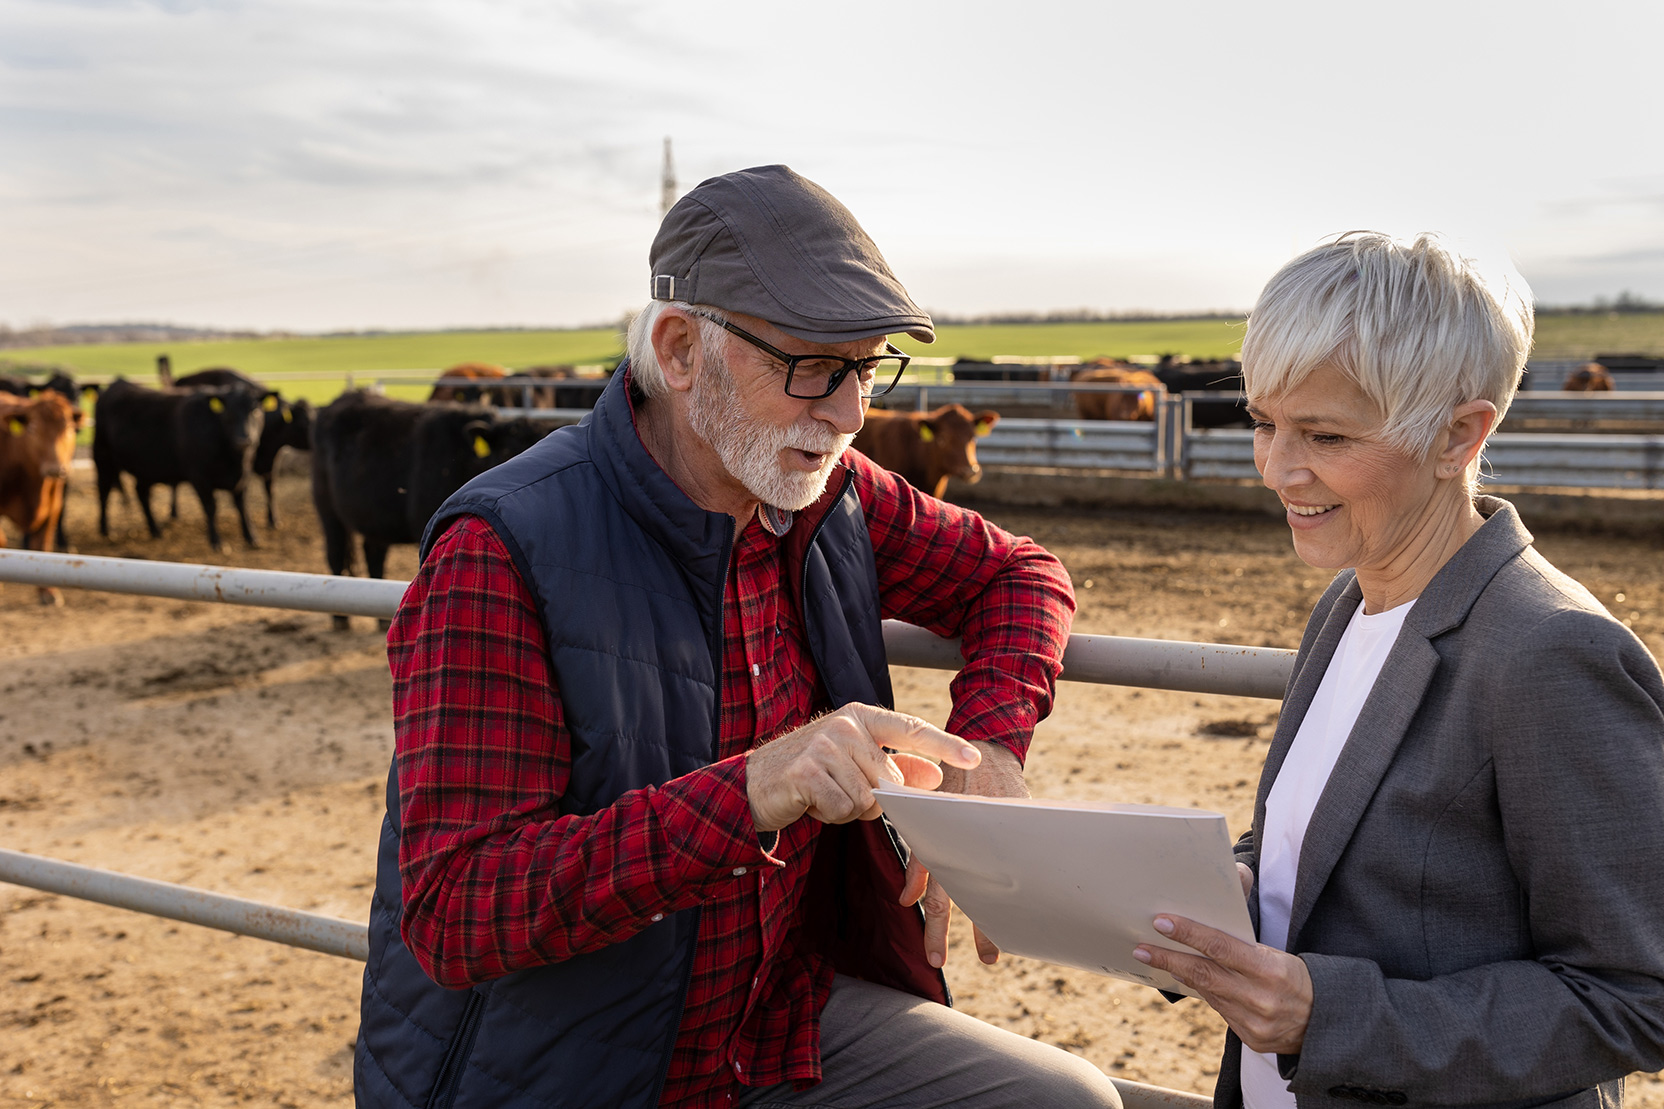 Two individuals talking in front of a fence with cows in the background